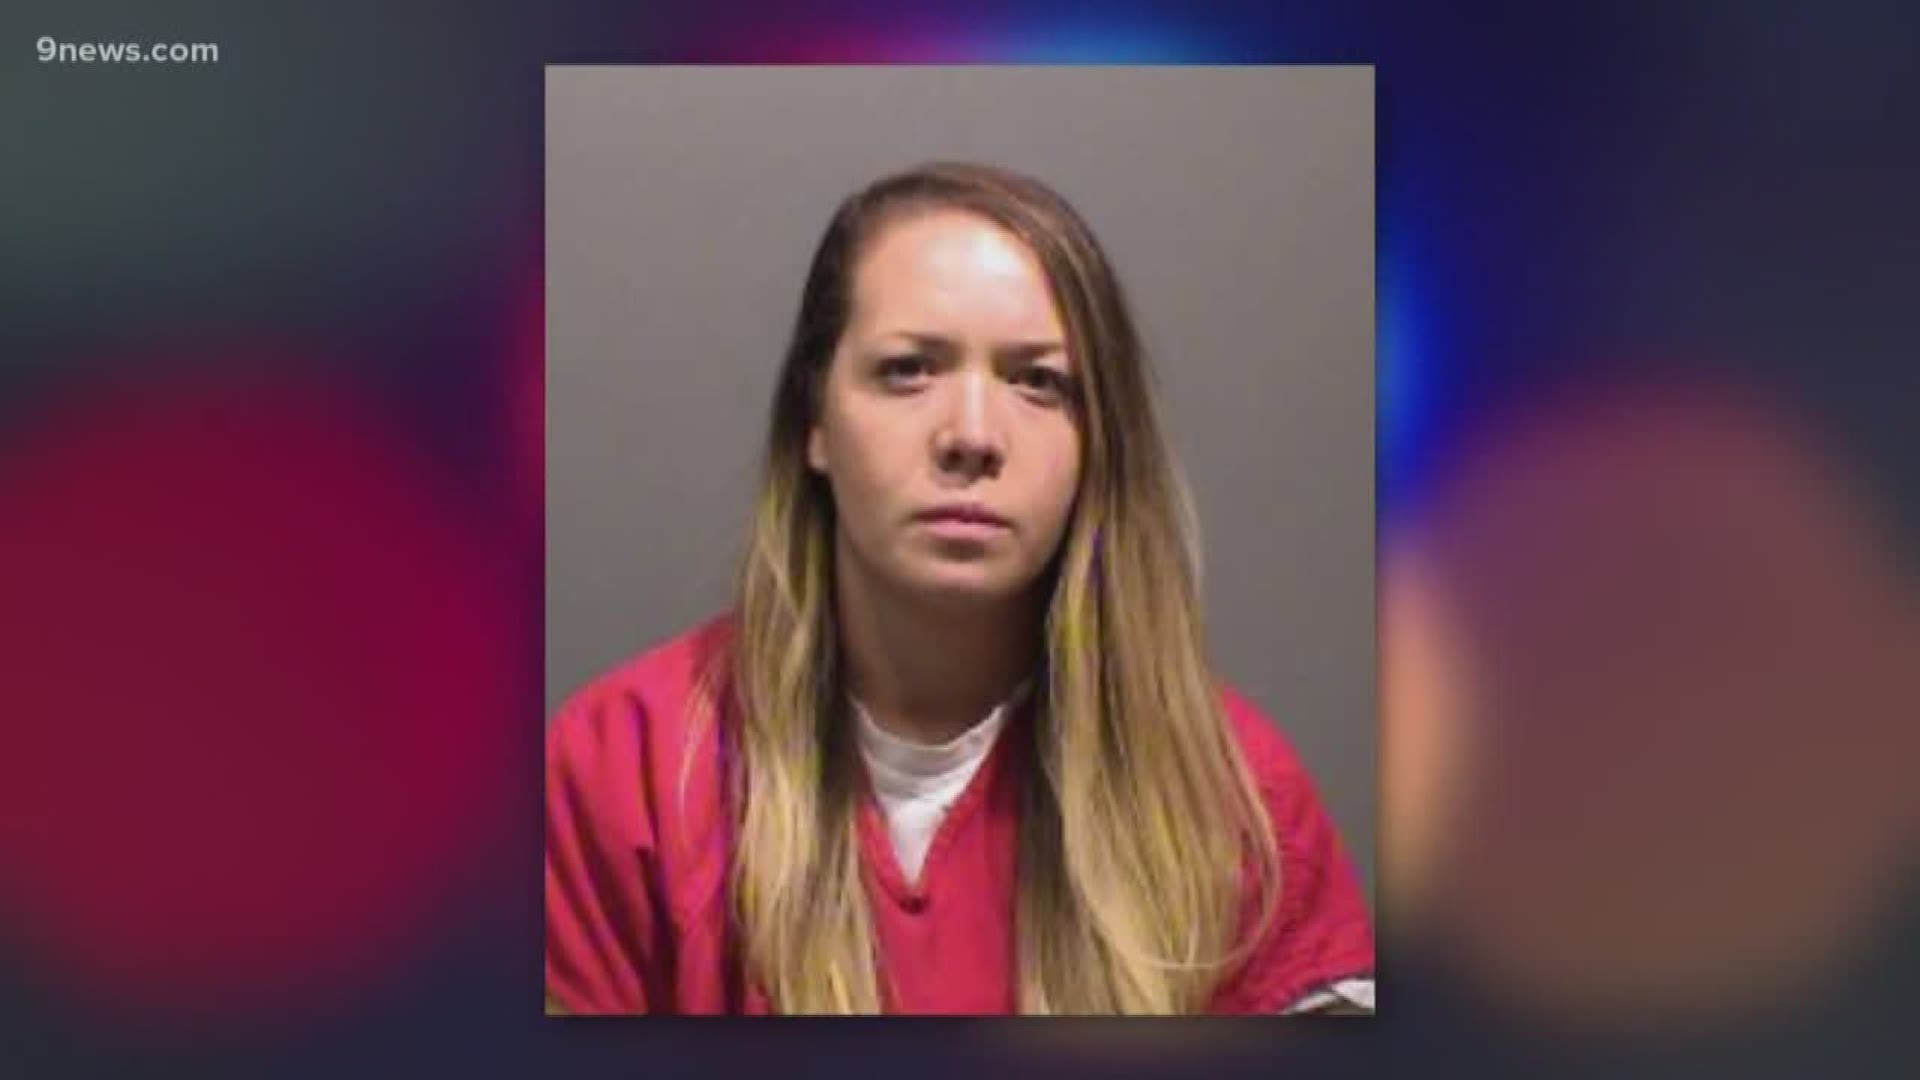 Kirsten Gonzalez is accused of providing a home pass to the inmate, which resulted in his escape in 2017.